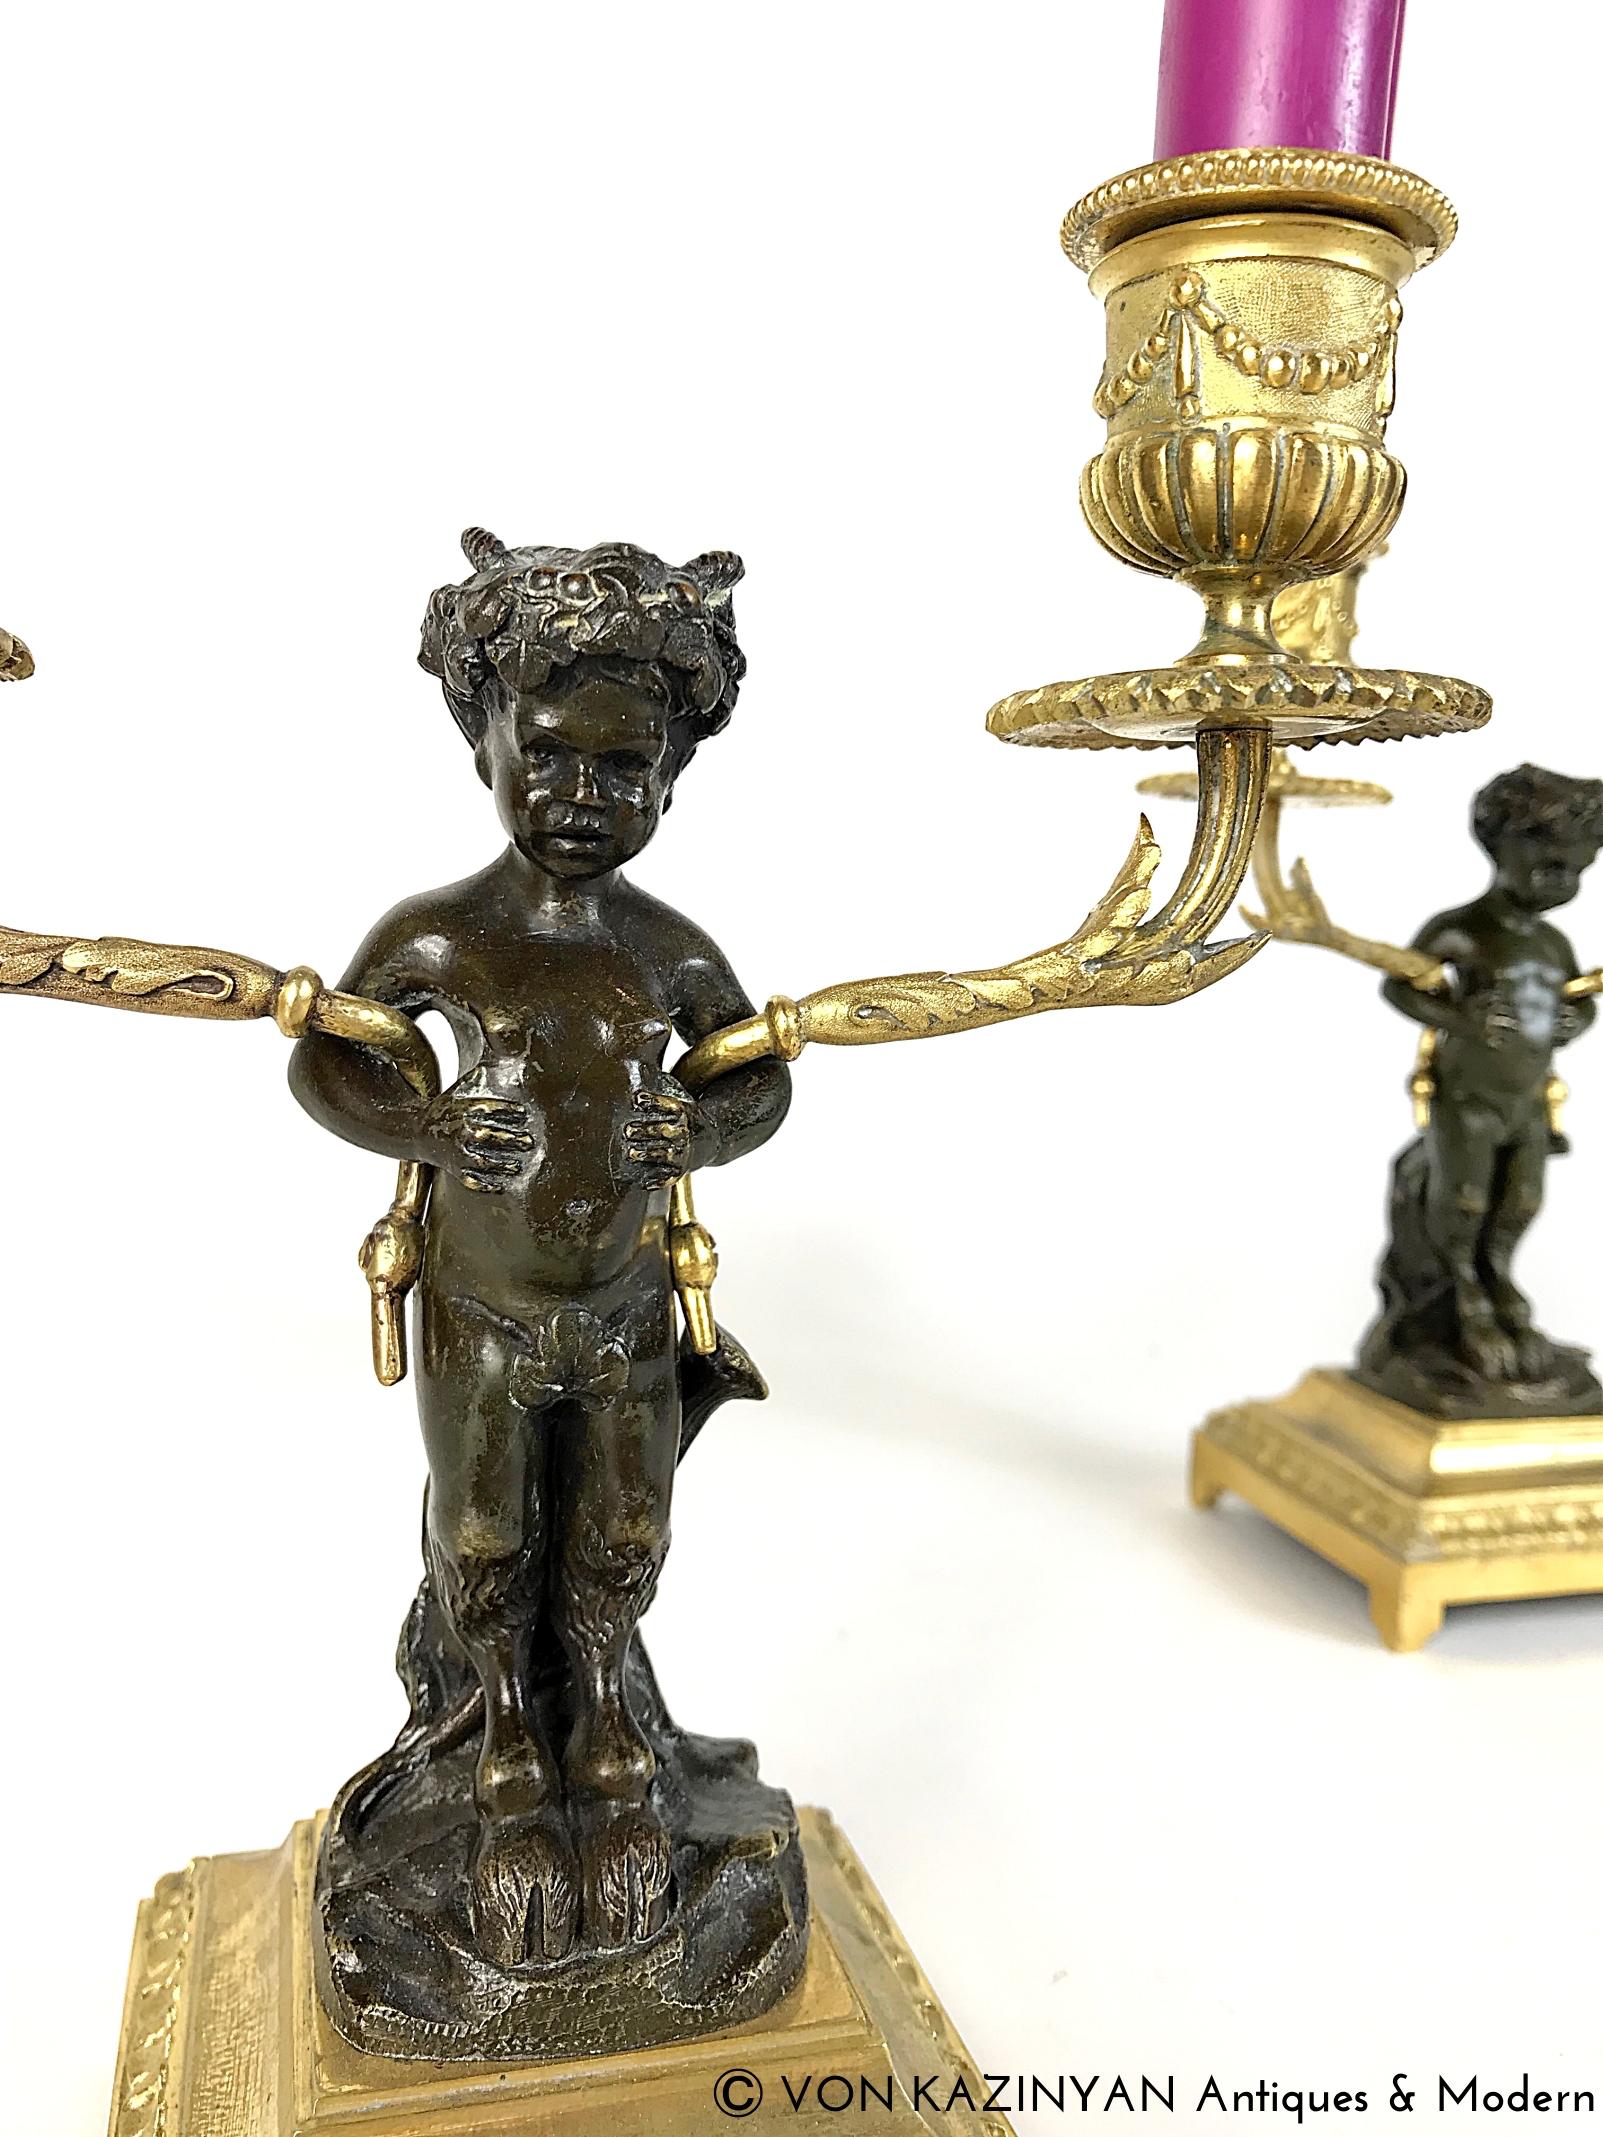 A pair of wonderful French gilt and patinated bronze candelabras made by Atelier Clodion in the mid-19th century. Depicting two patinated bronze satyrs sitting on a tree stump holding two gilt berried branches which lead to a candleholder on each